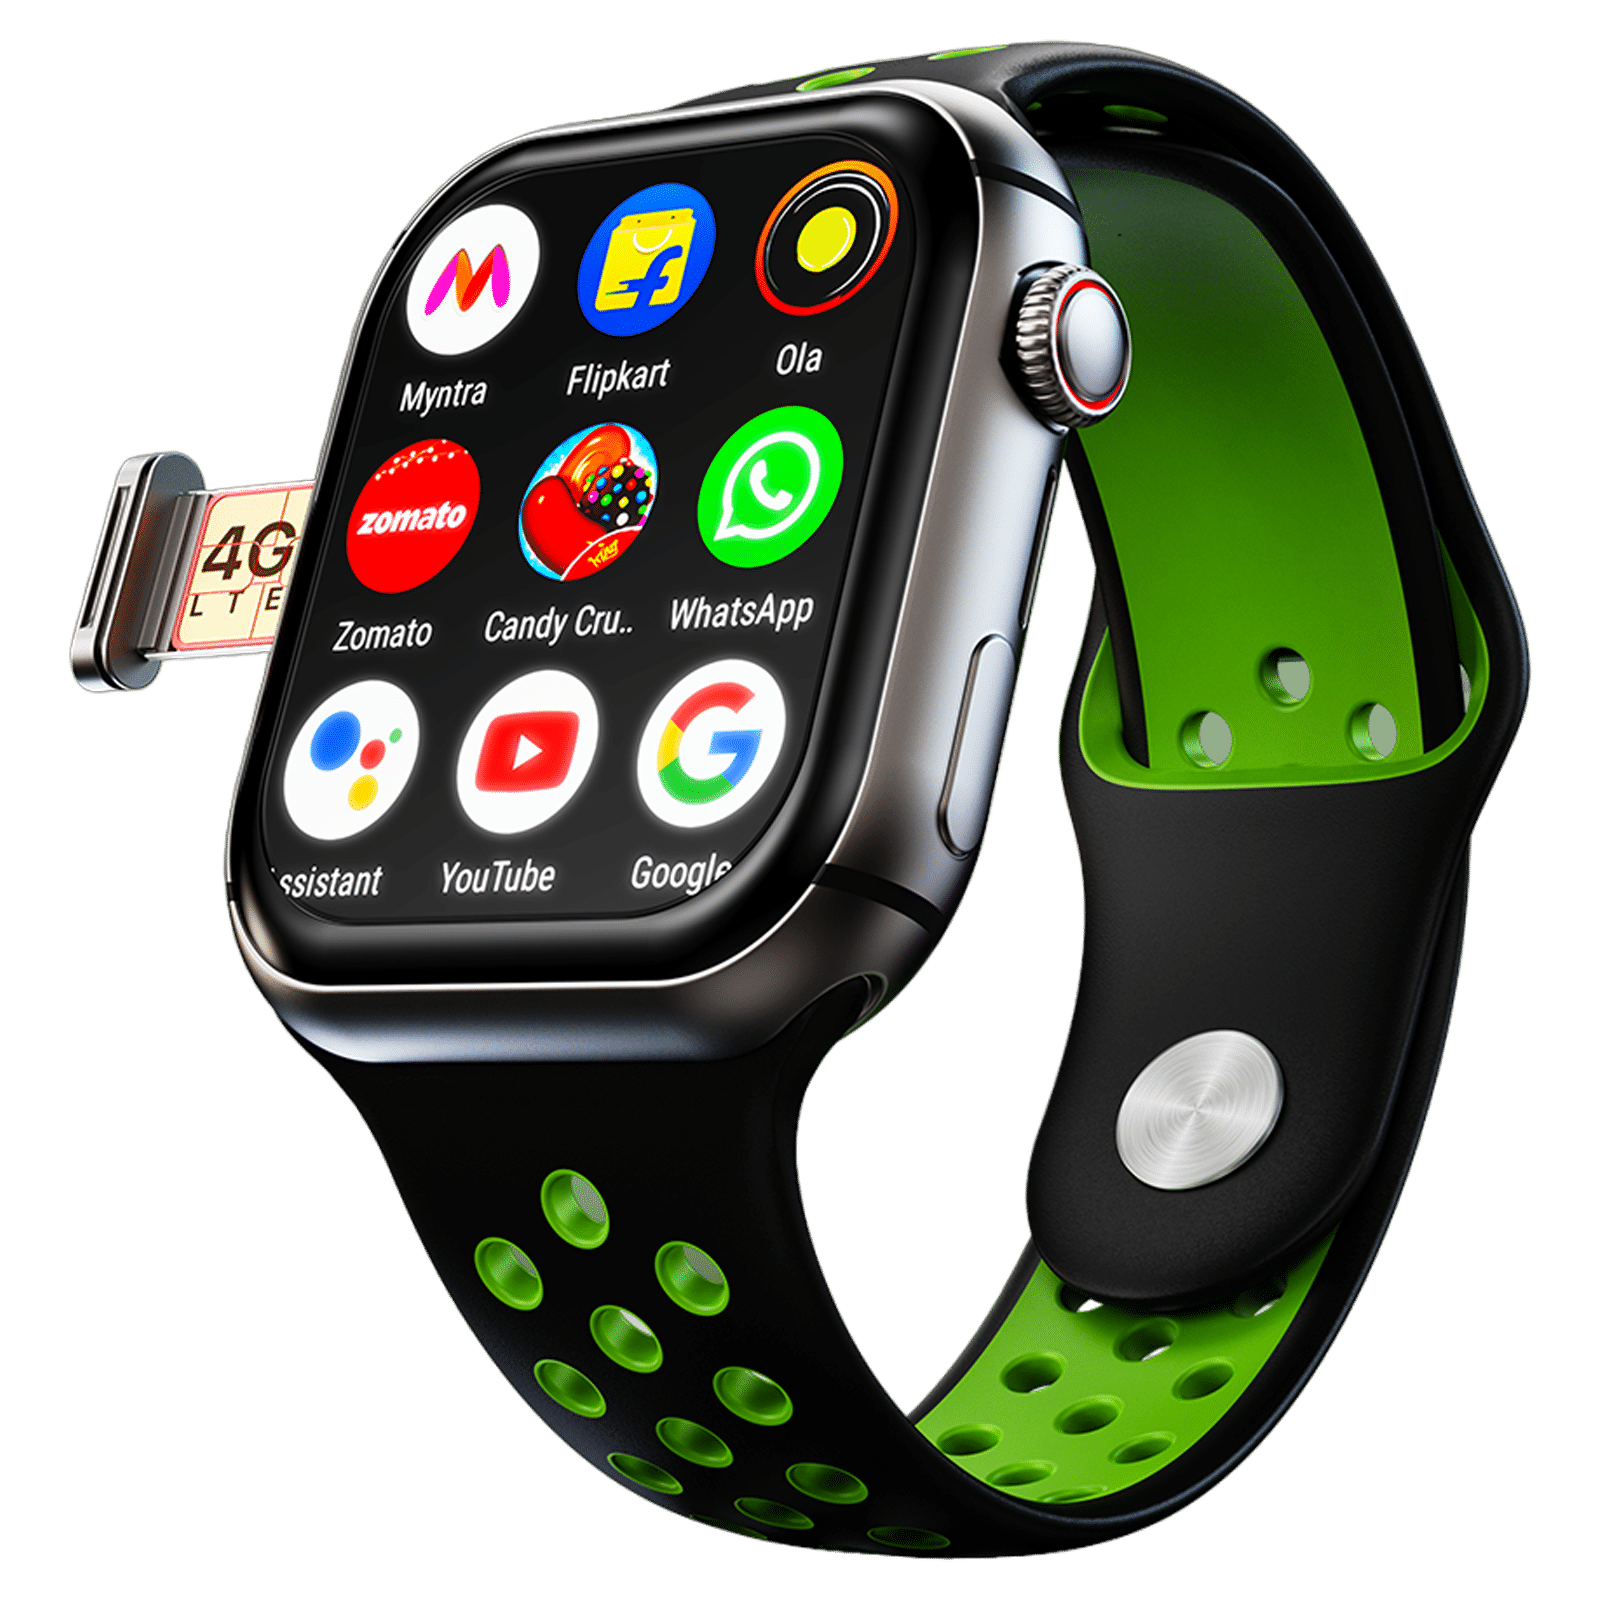 FIREBOLTT DREAM ANDROID WATCH | 4G LTE | WIFI - Mobile Phones - 1761345161